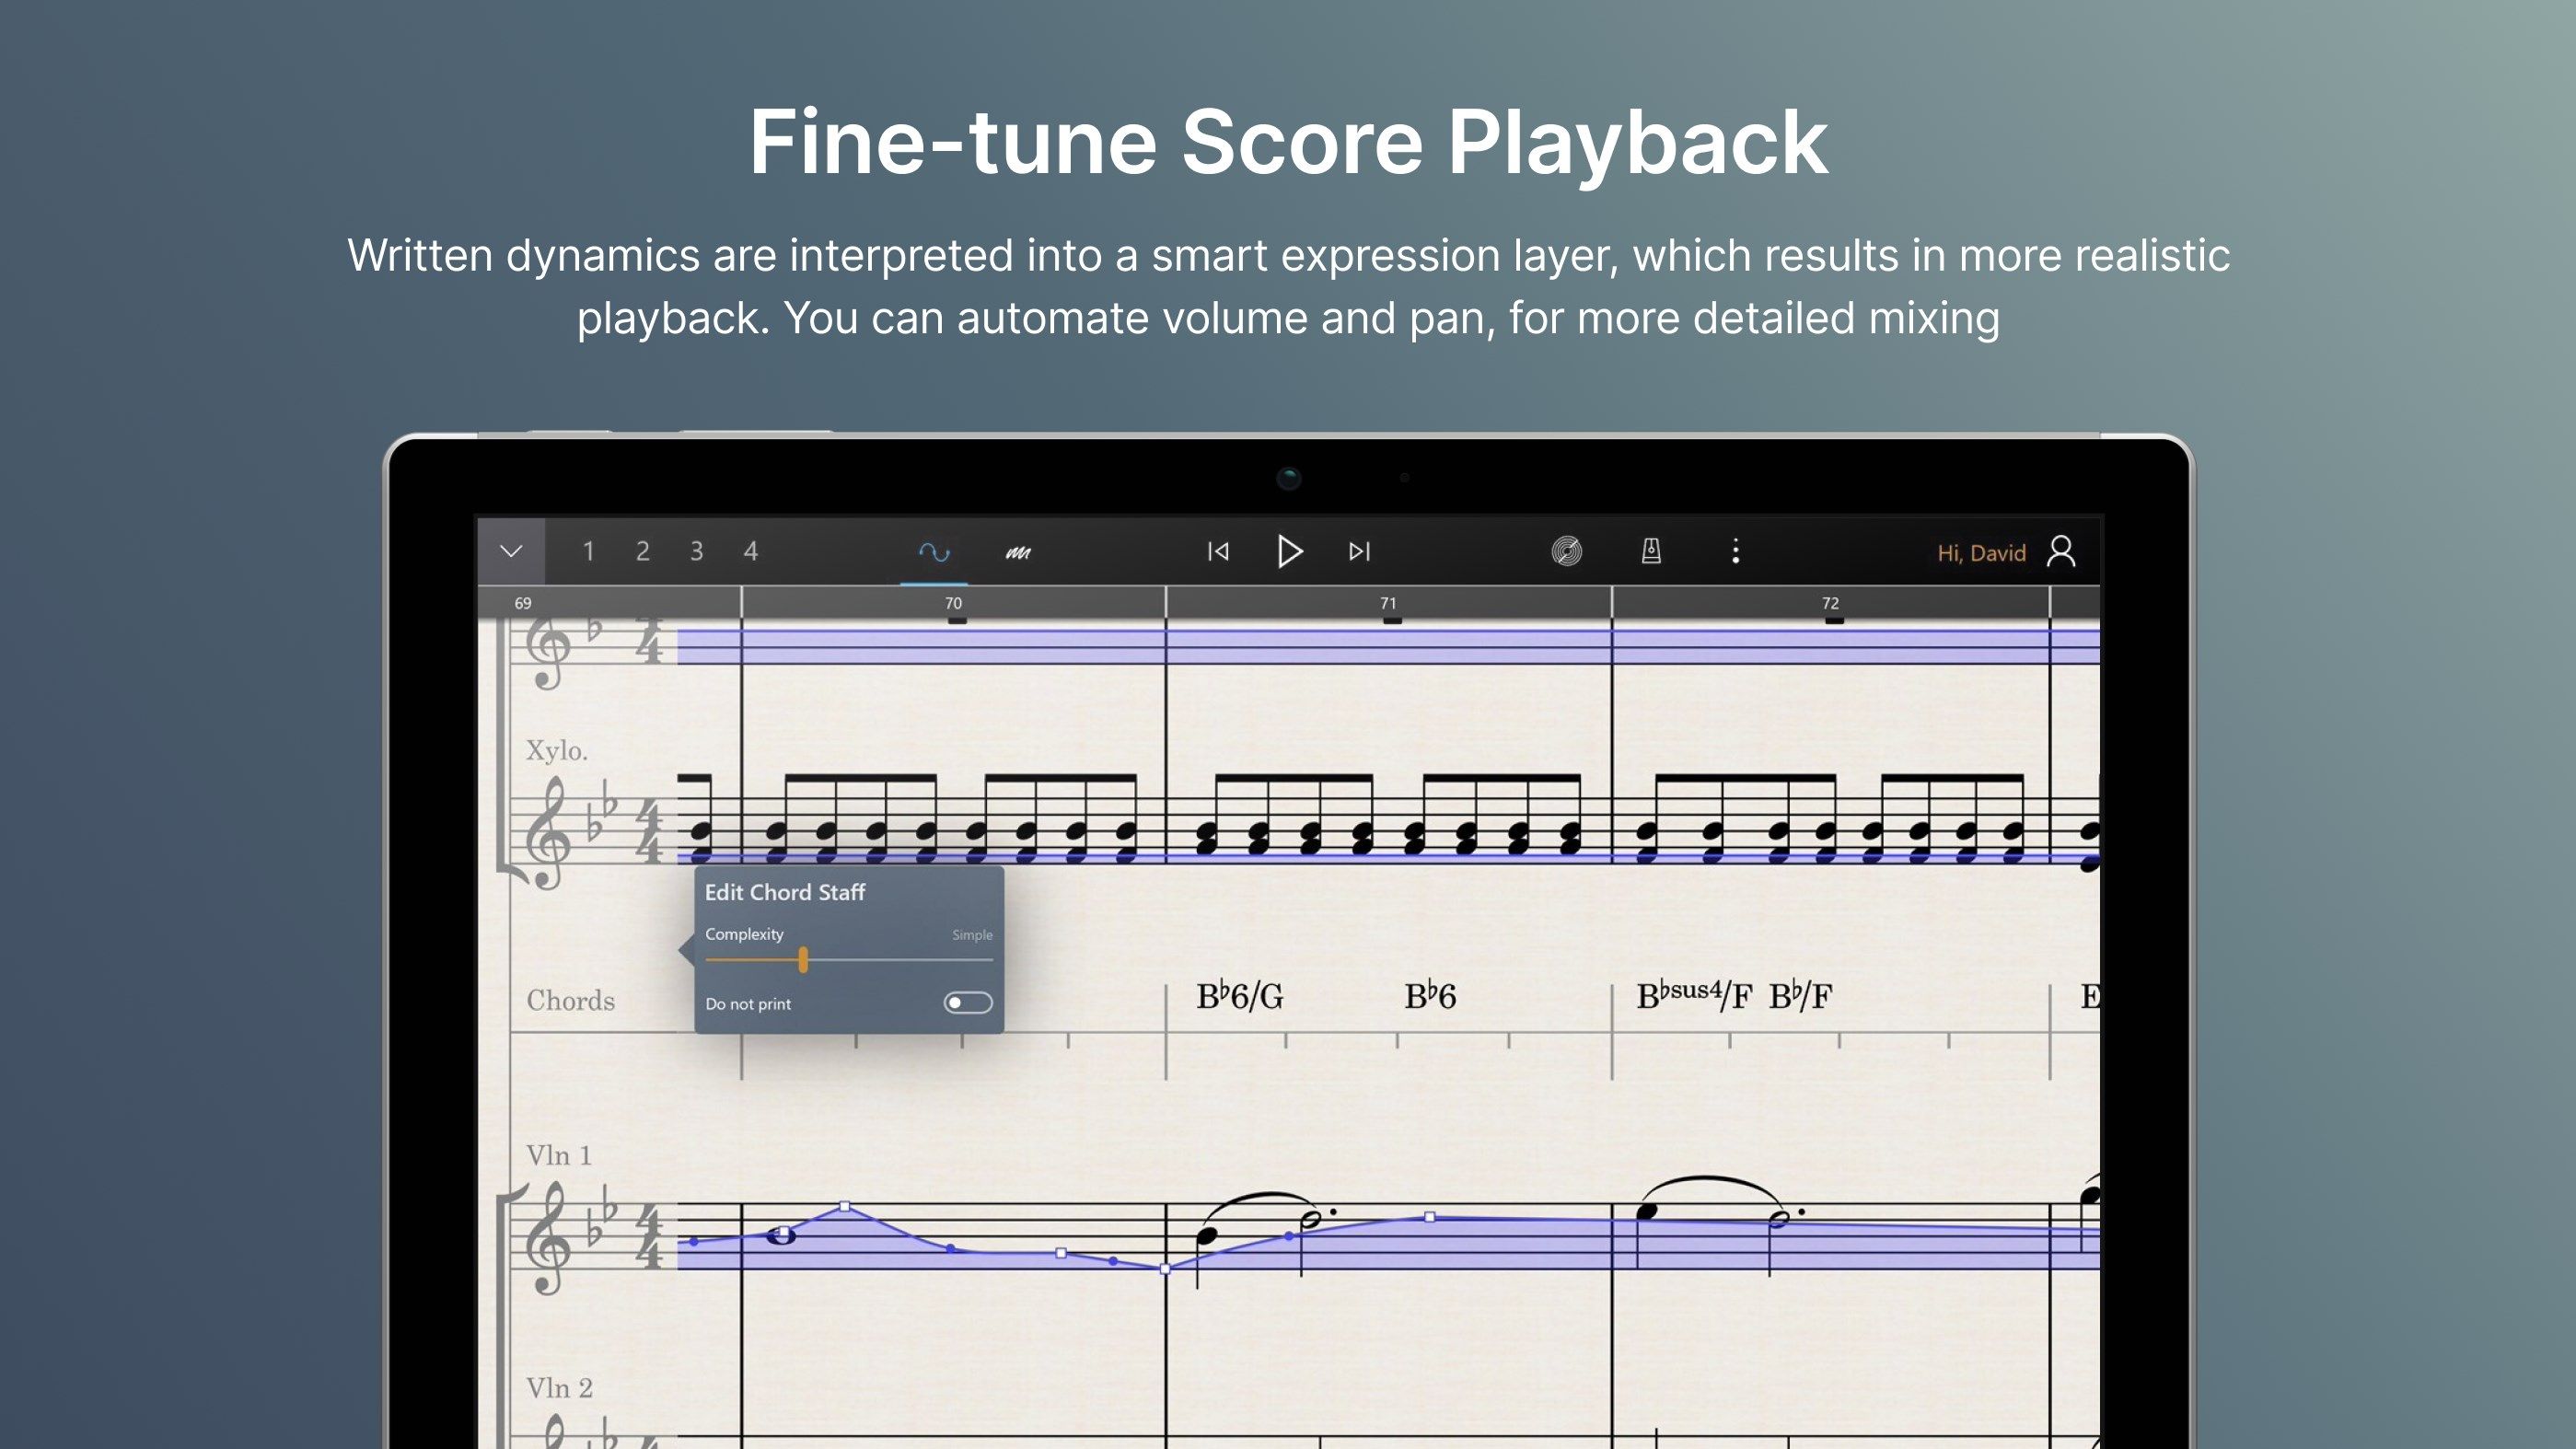 Fine-tune Score Playback: Written dynamics are interpreted into a smart expression layer, which results in more realistic playback. You can automate volume and pan, for more detailed mixing